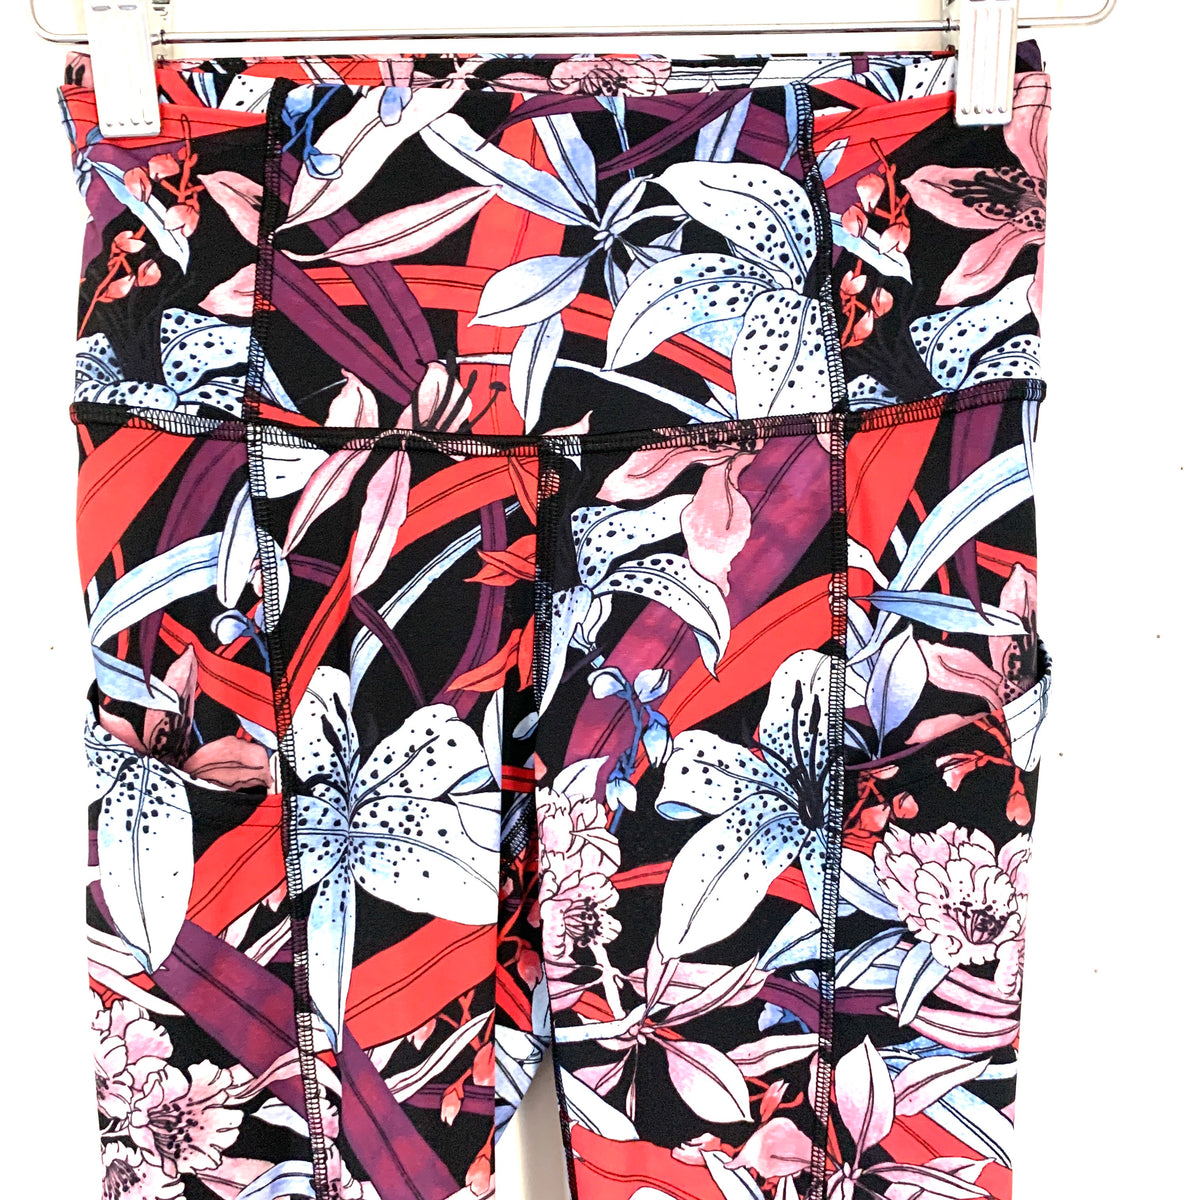 Lululemon Cropped Floral Leggings With